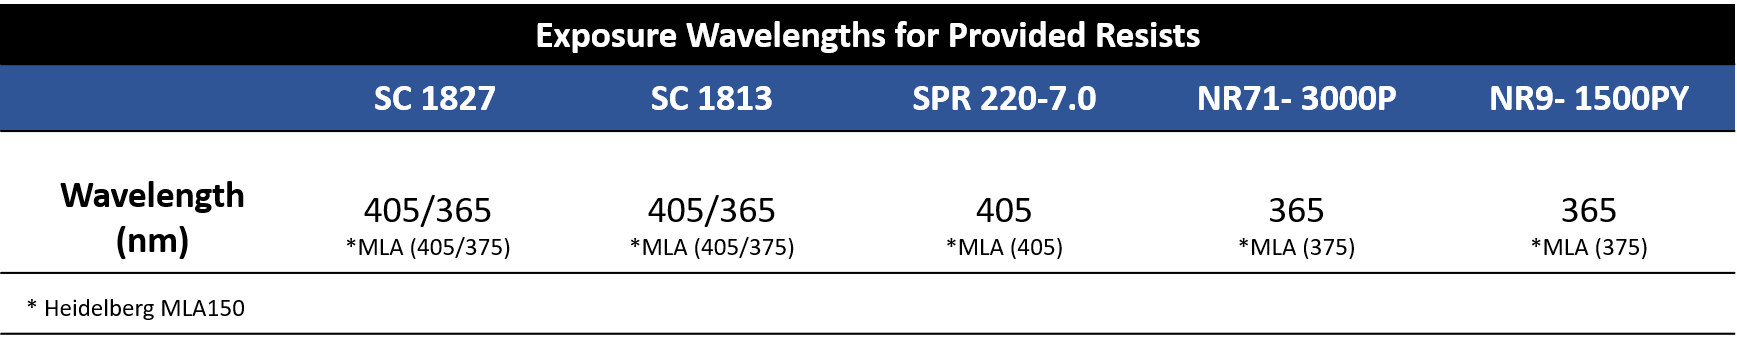 Exposure Wavelengths for Provided Resists